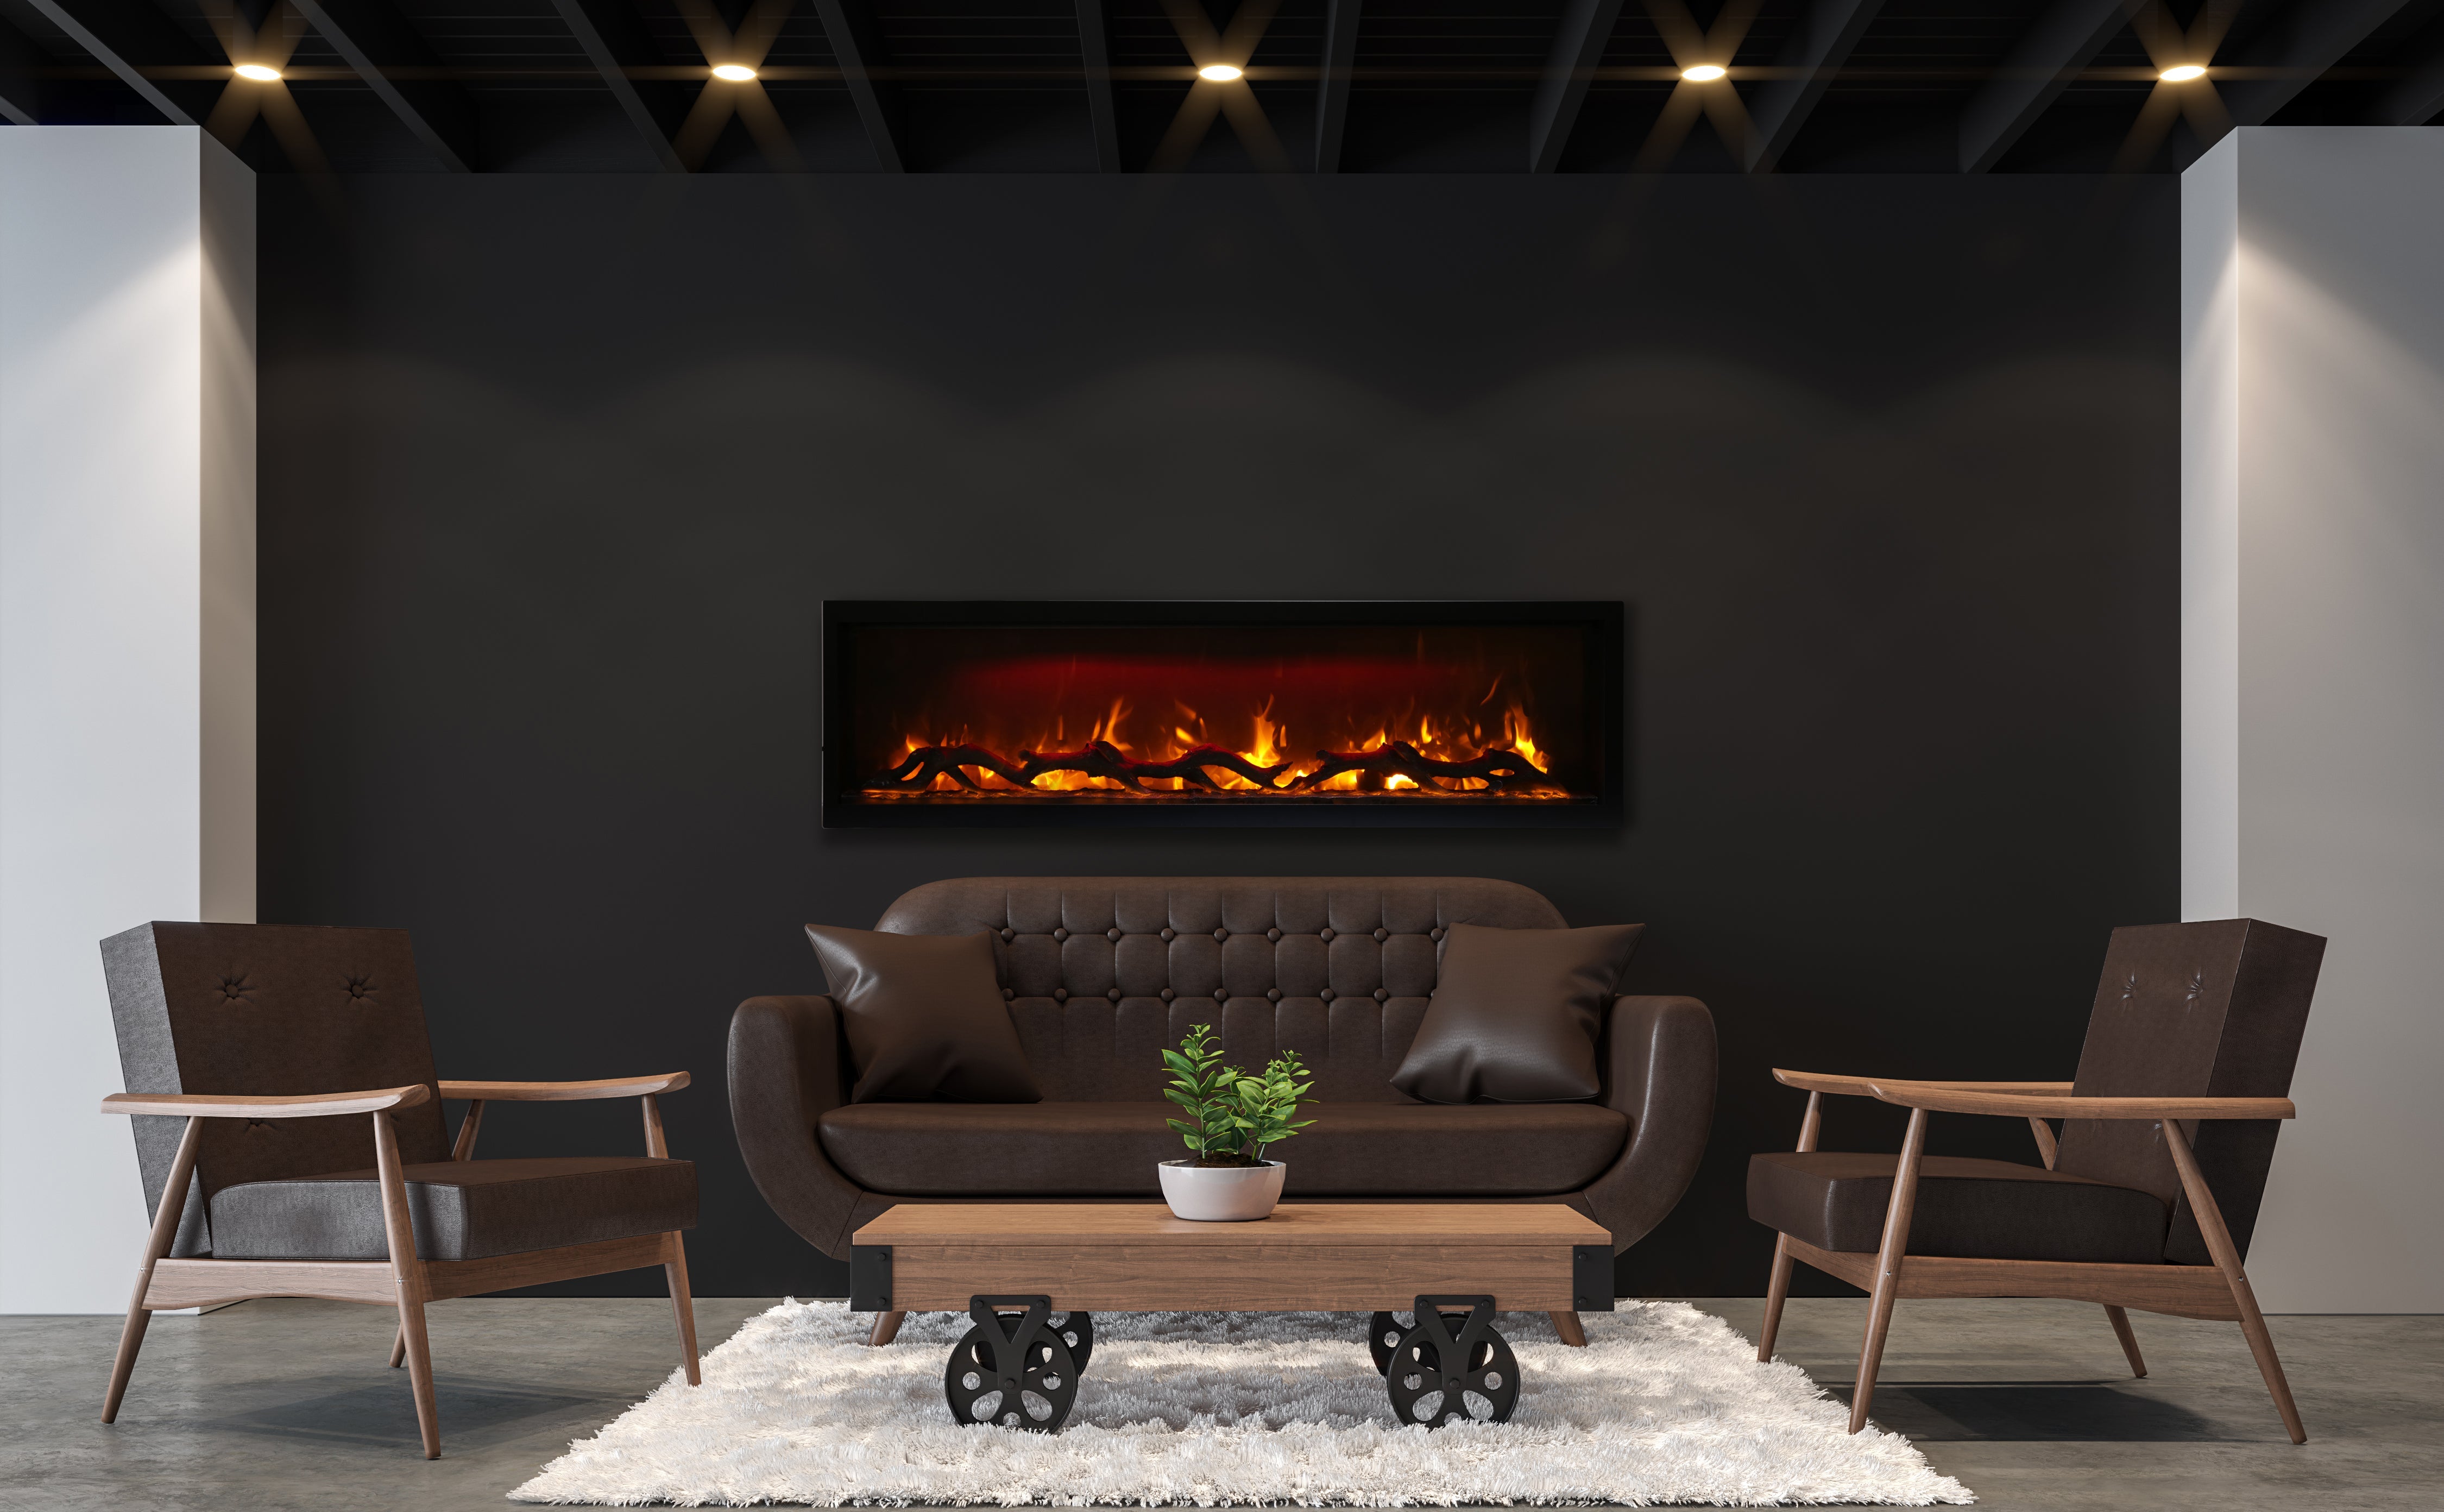 Amantii 60" Symmetry 3.0 Built-in Smart WiFi Electric Fireplace -SYM-60- Lifestyle Living Room Black Wall